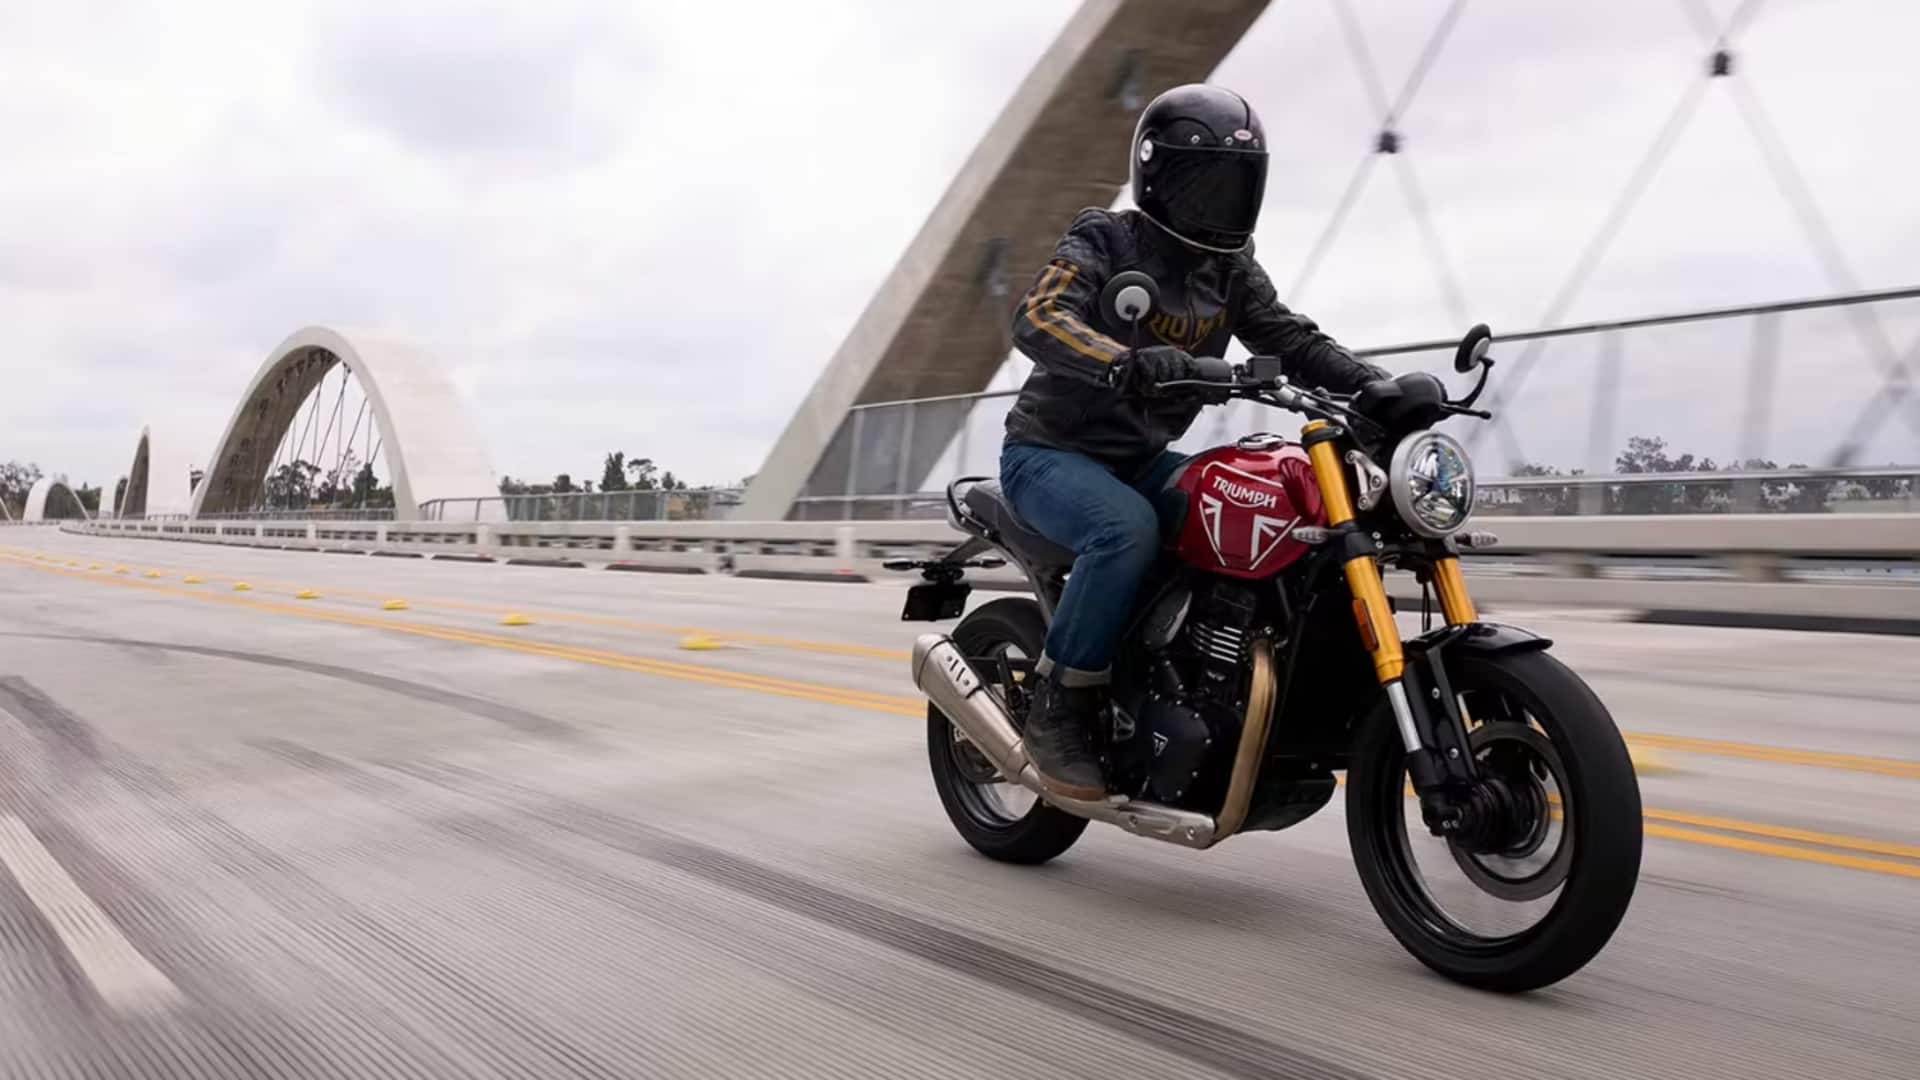 Triumph Speed 400 becomes costlier by Rs. 10,000: Here's why